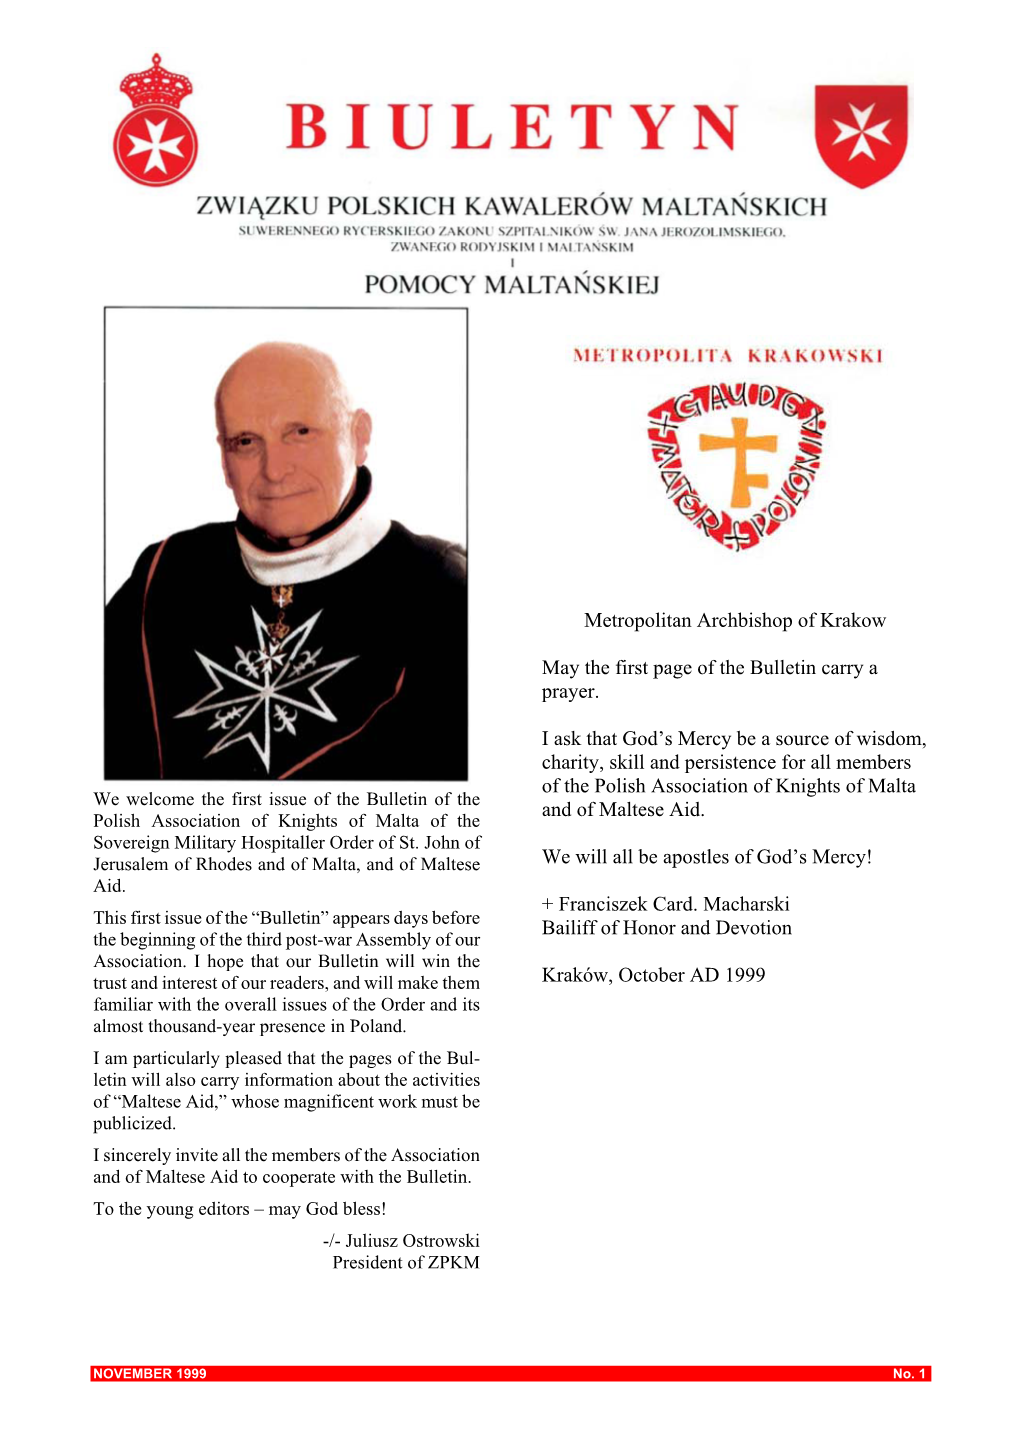 Metropolitan Archbishop of Krakow May the First Page of the Bulletin